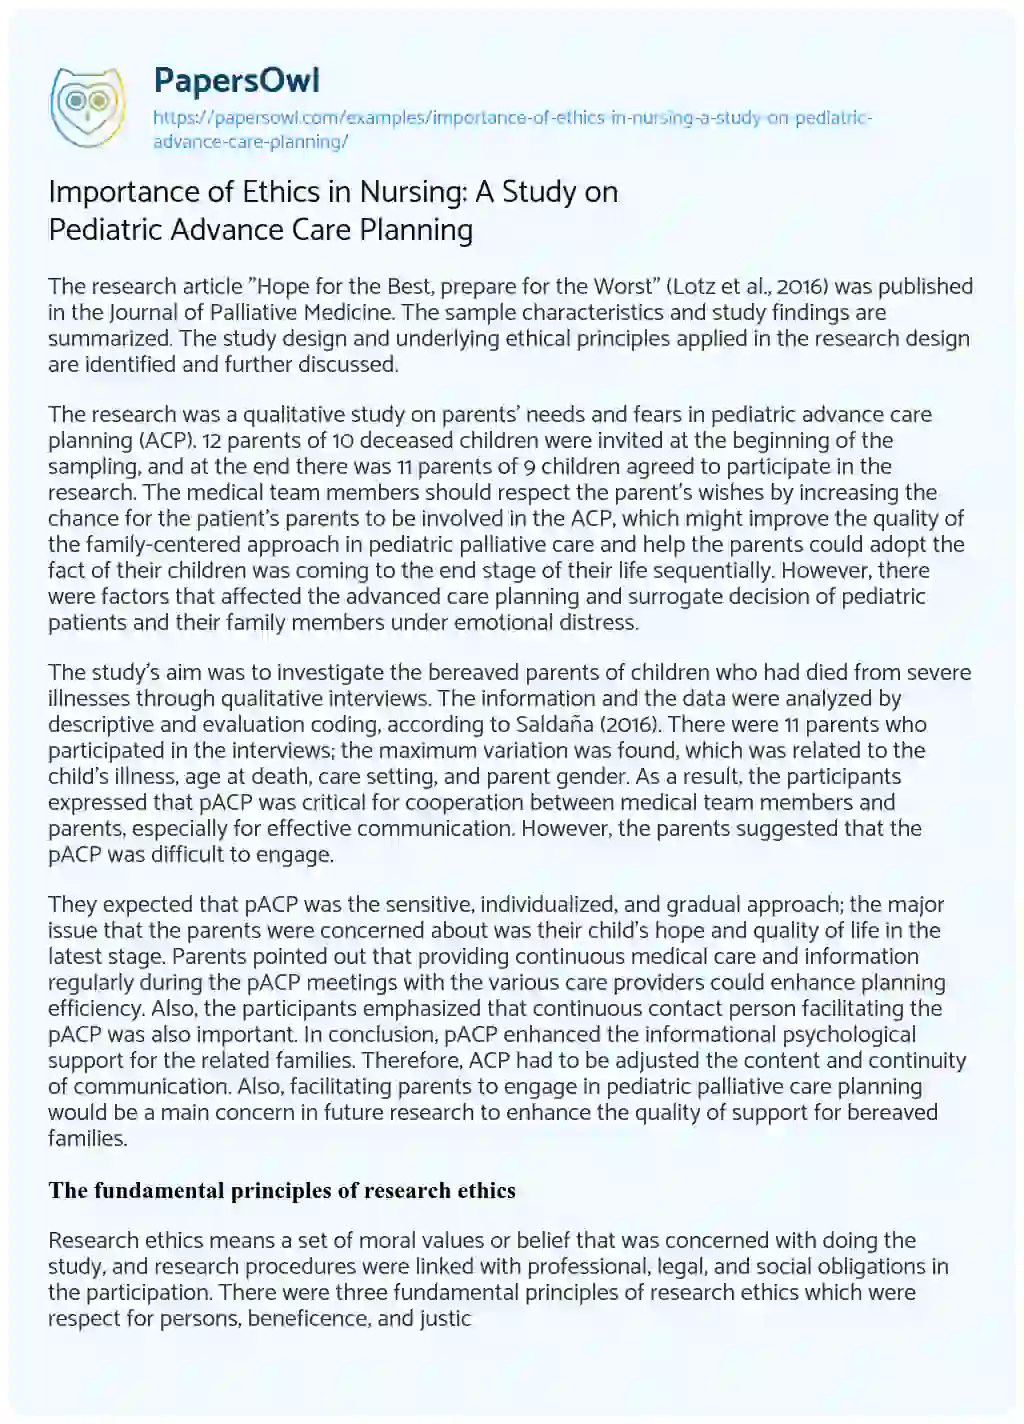 Essay on Importance of Ethics in Nursing: a Study on Pediatric Advance Care Planning